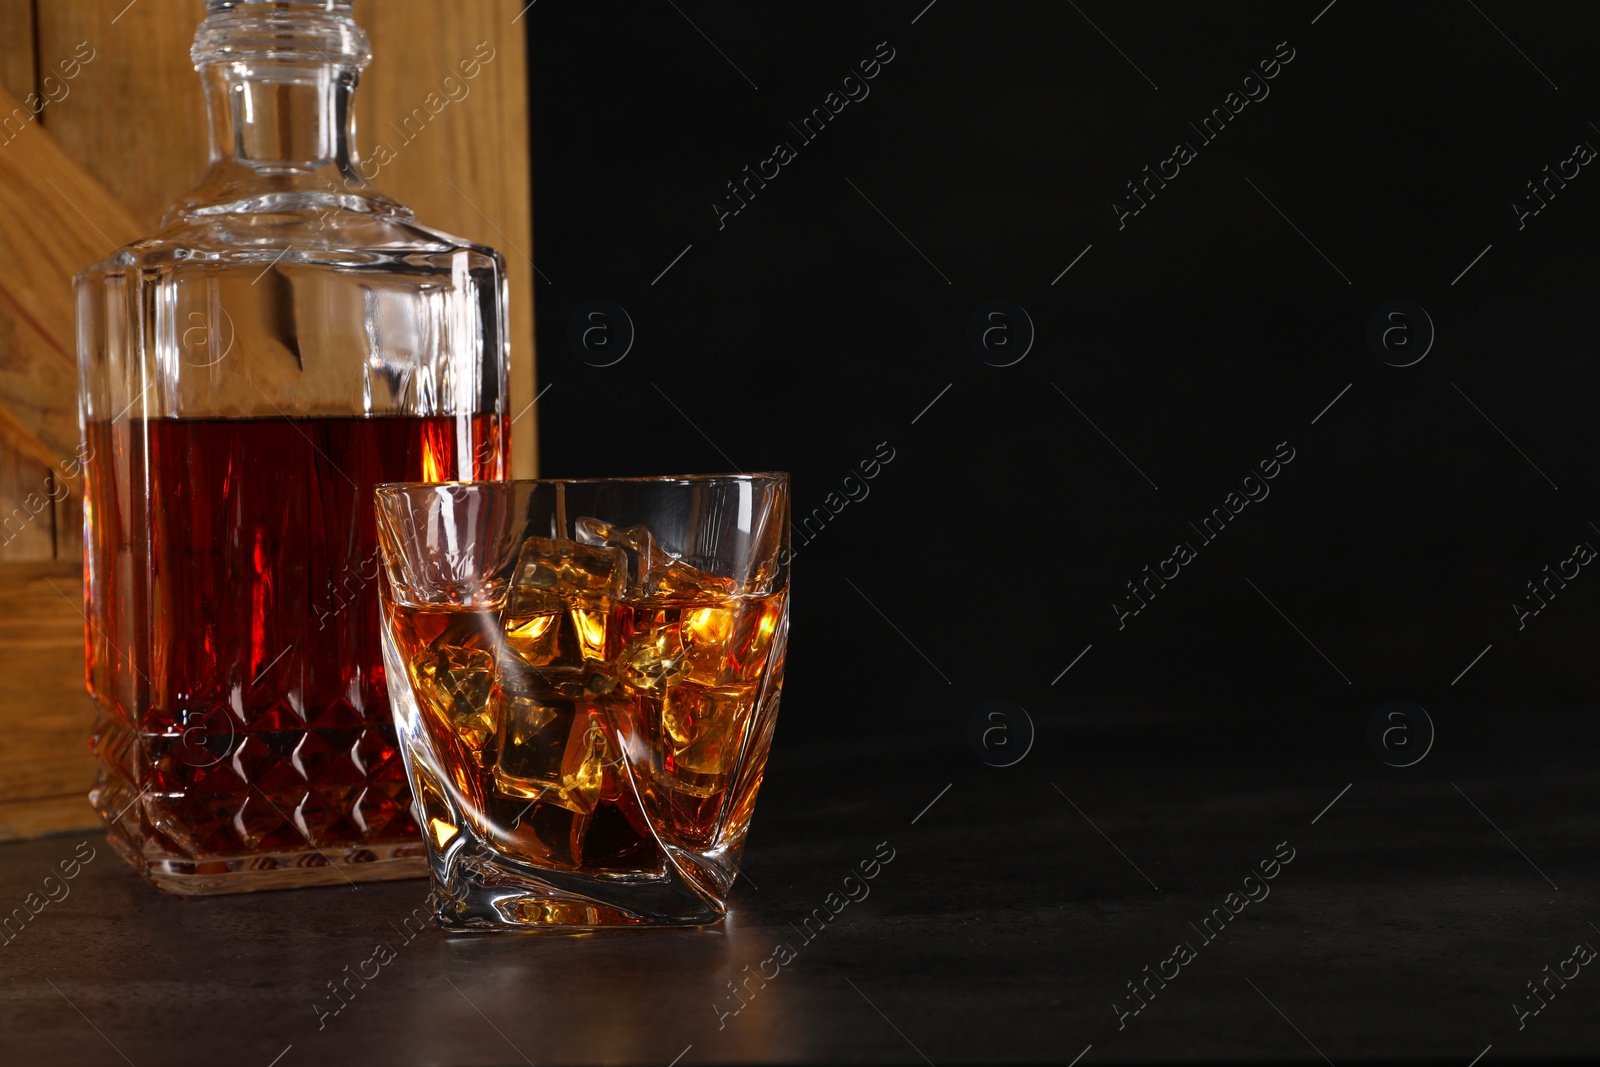 Photo of Whiskey in glass and bottle near wooden crate on dark table against black background. Space for text